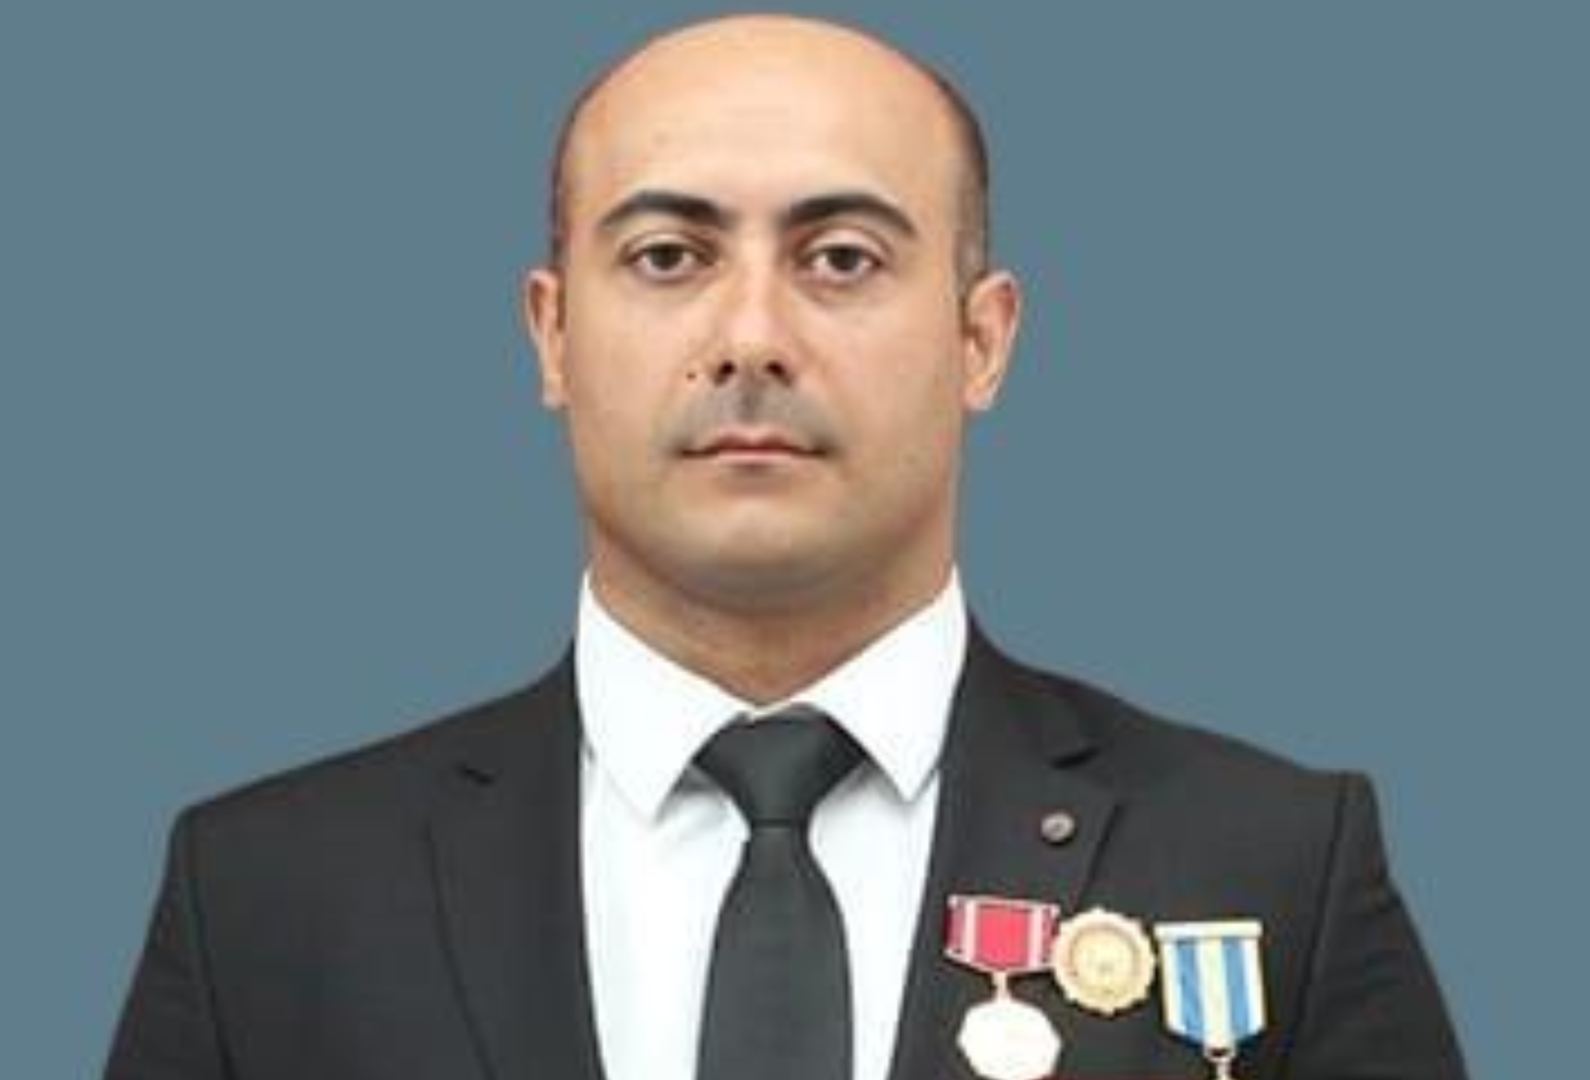 Azerbaijan appoints participant of second Karabakh war to leadership position